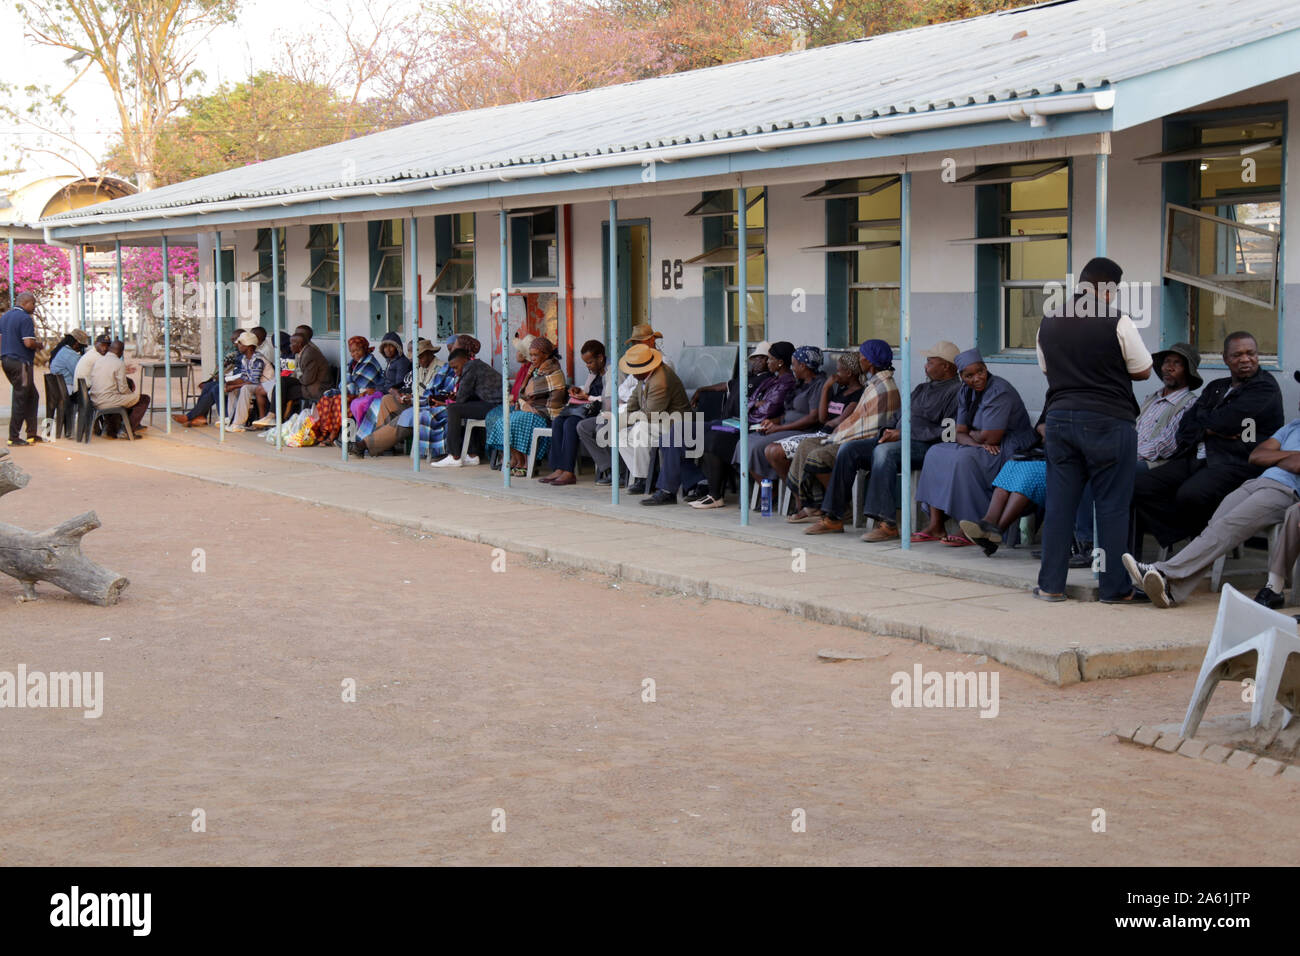 Gaborone Oct 23 19 Xinhua Voters Queue To Cast Their Ballots At Mosielele Primary School Polling Station In Moshupa Botswana Oct 23 19 Botswana Kicked Off Its 12th General